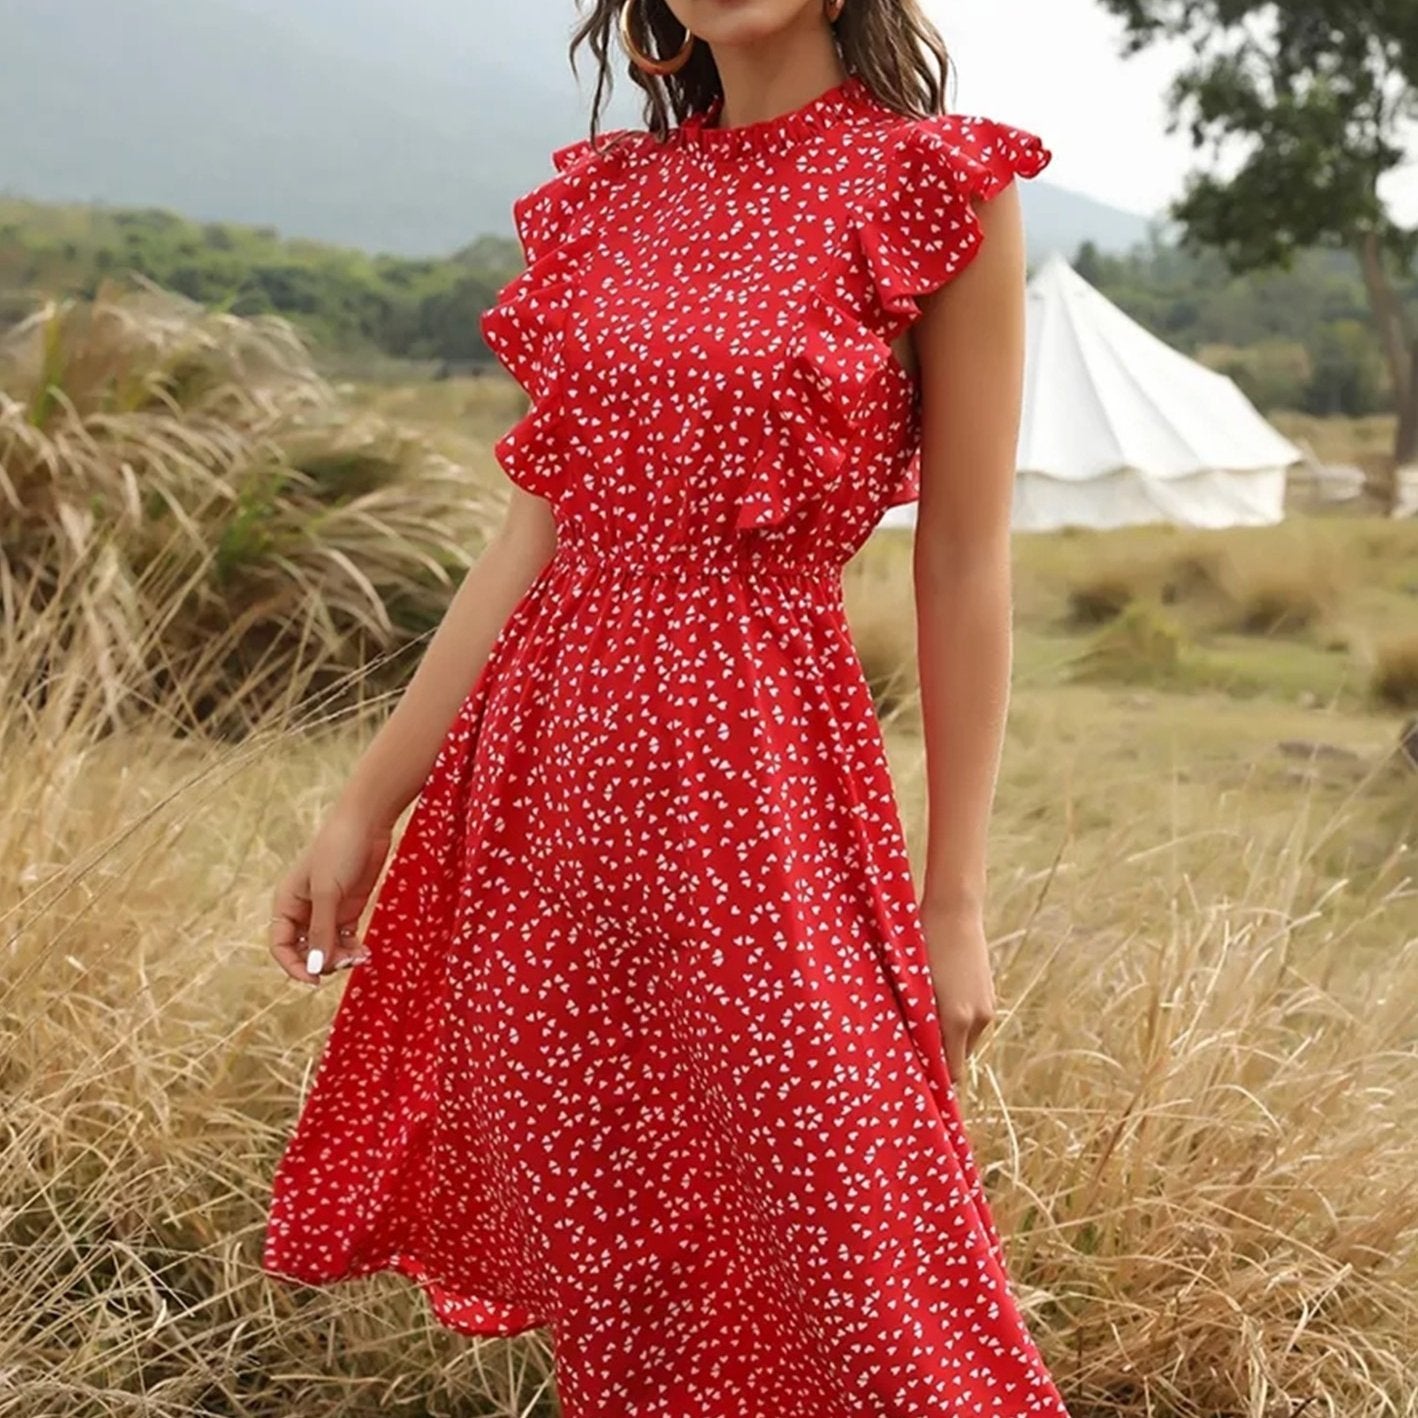 「lovevop」Women's Dresses Chiffon Dress Women Elegant Summer Floral Print Ruffle A-line Sundress Casual Fitted Clothes To Knees Dresses